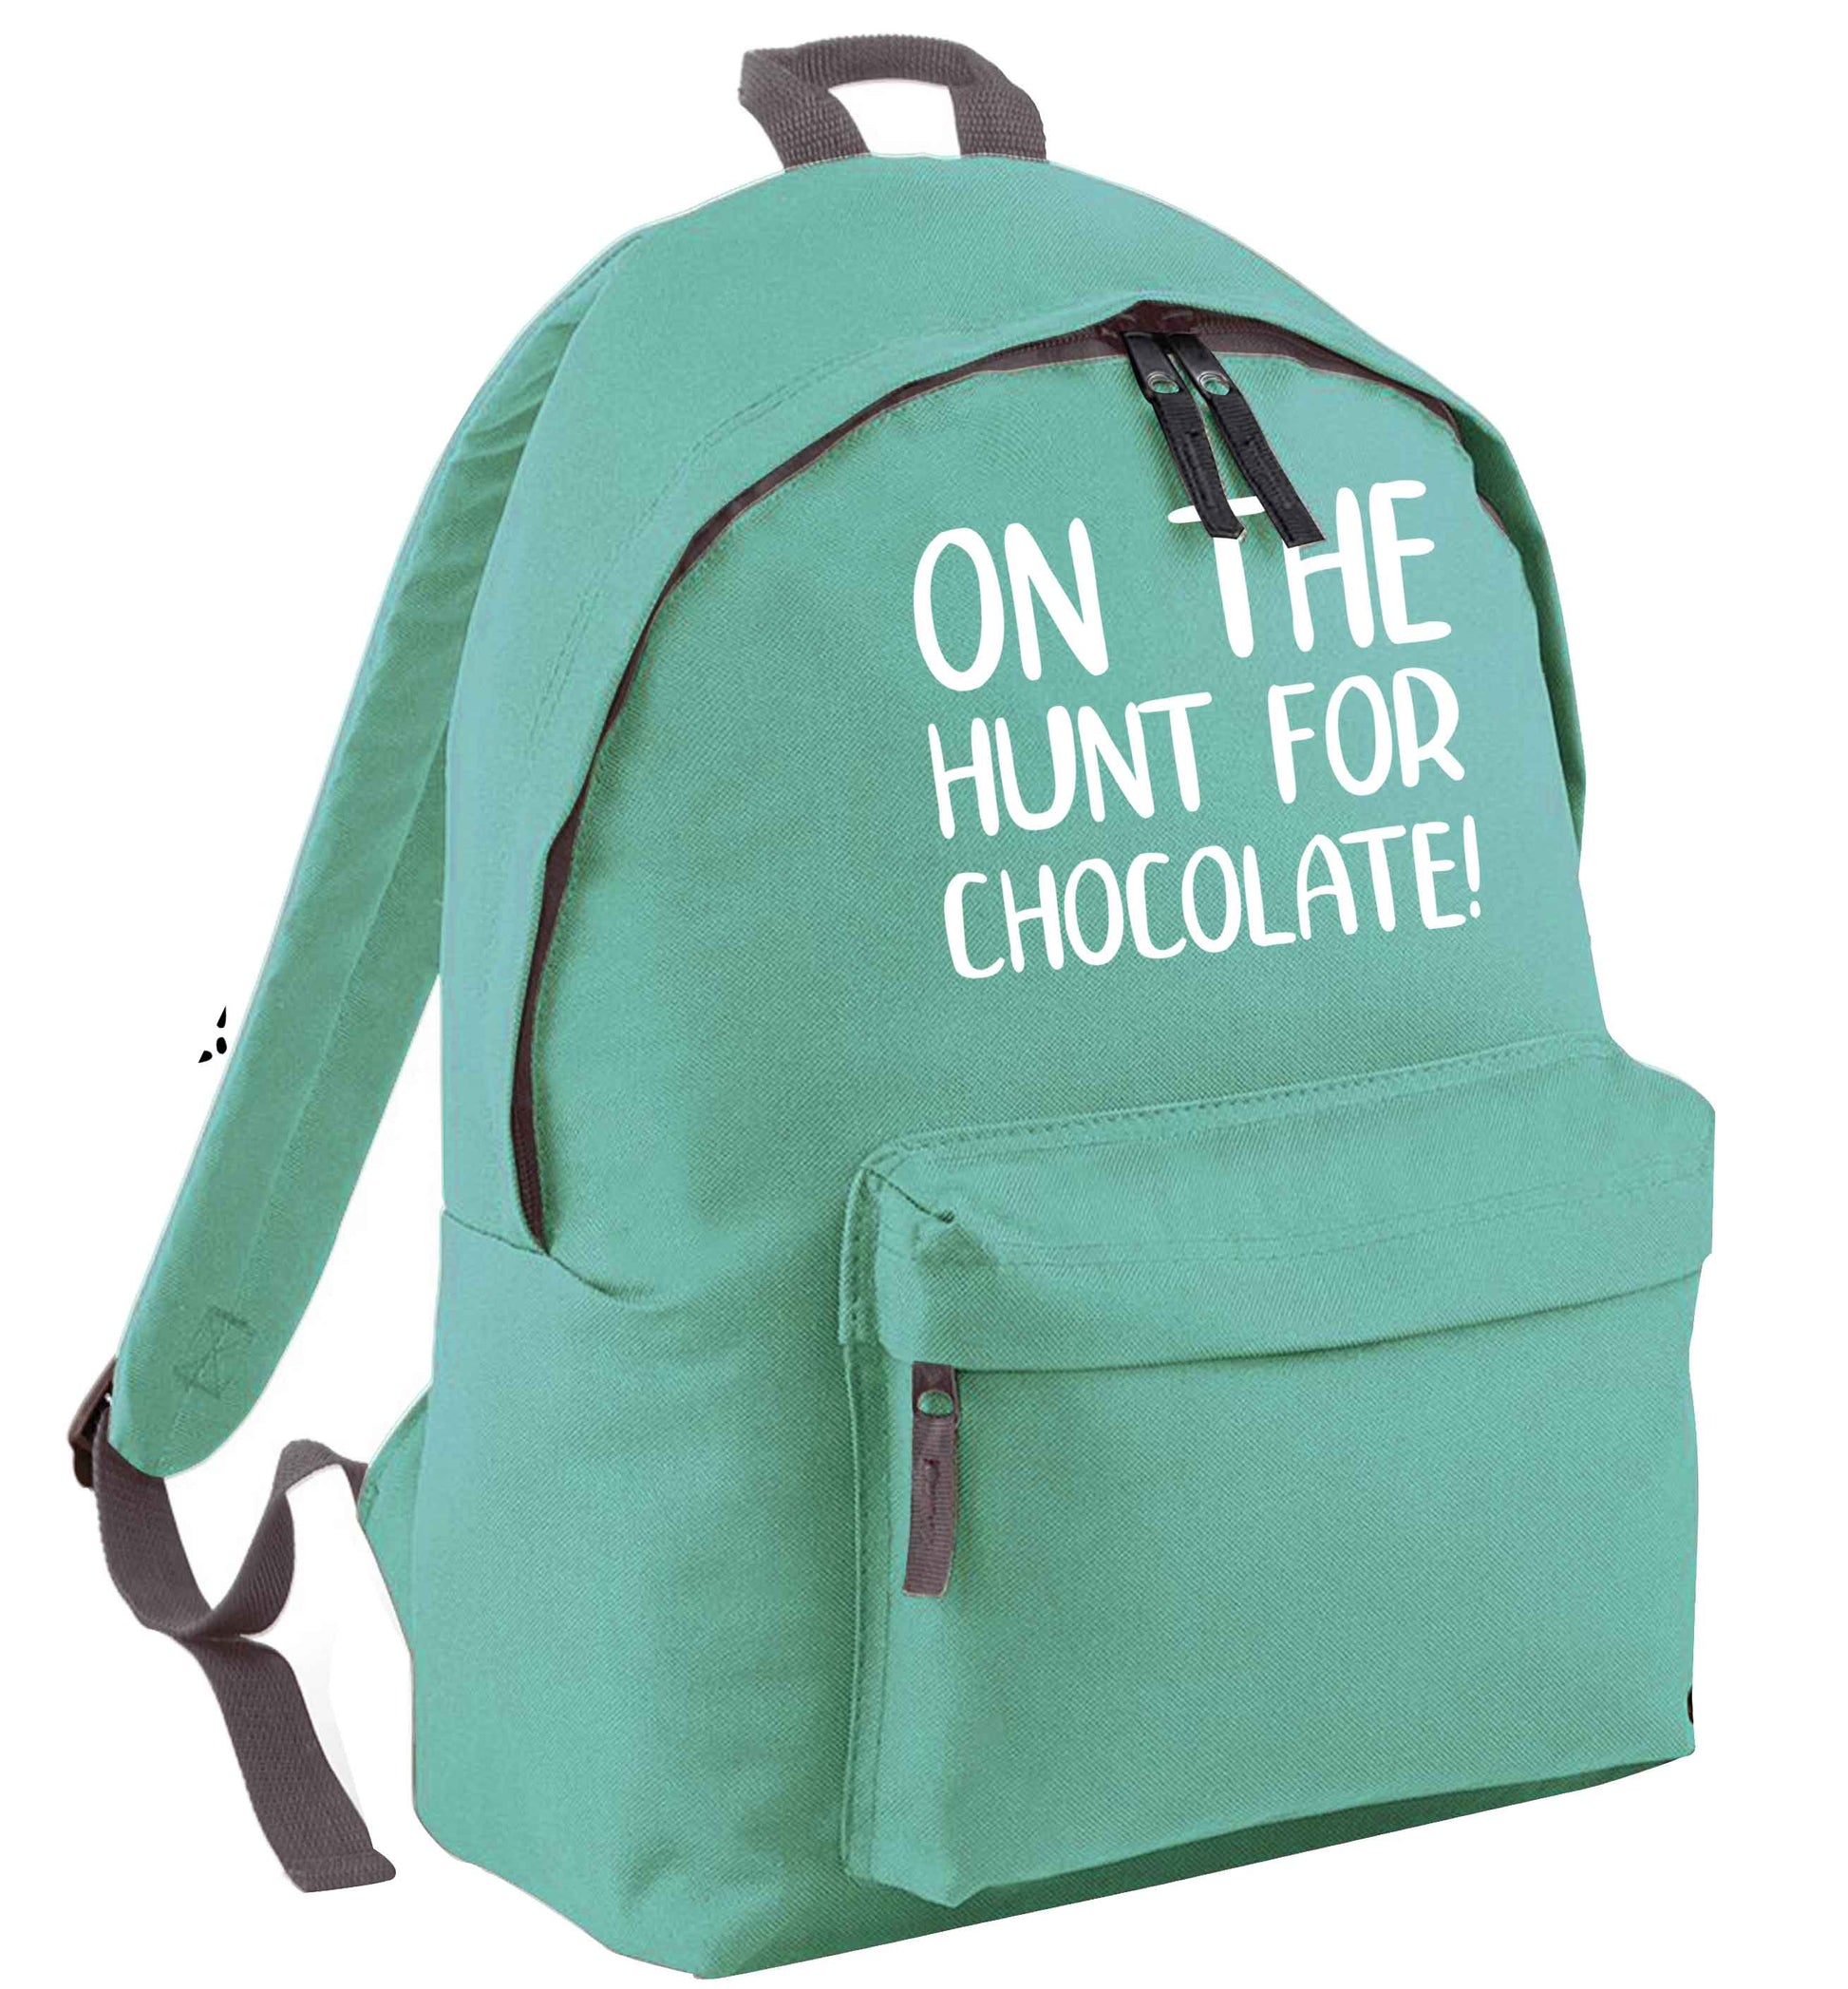 On the hunt for chocolate! mint adults backpack